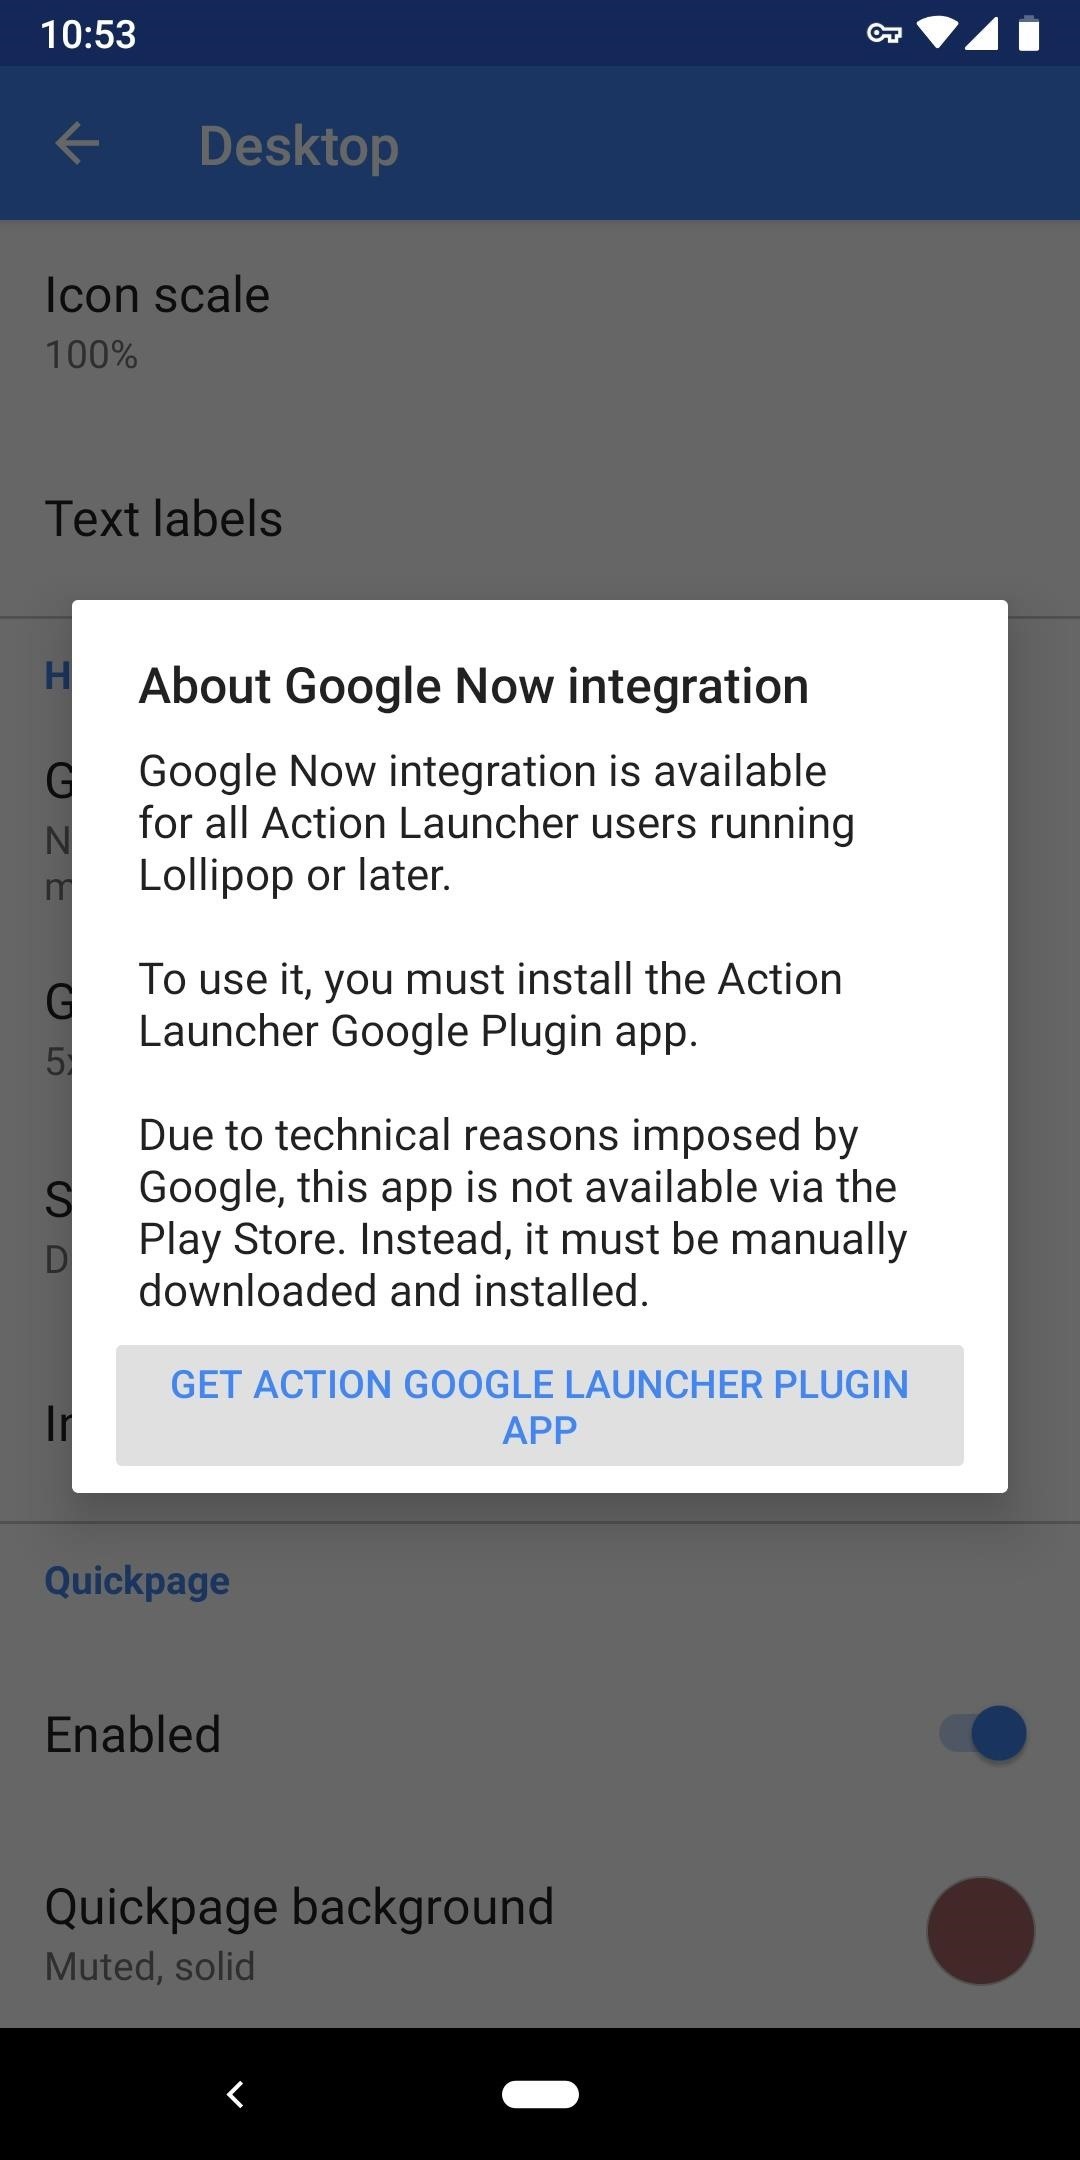 How to Enable Google Now Integration in Action Launcher